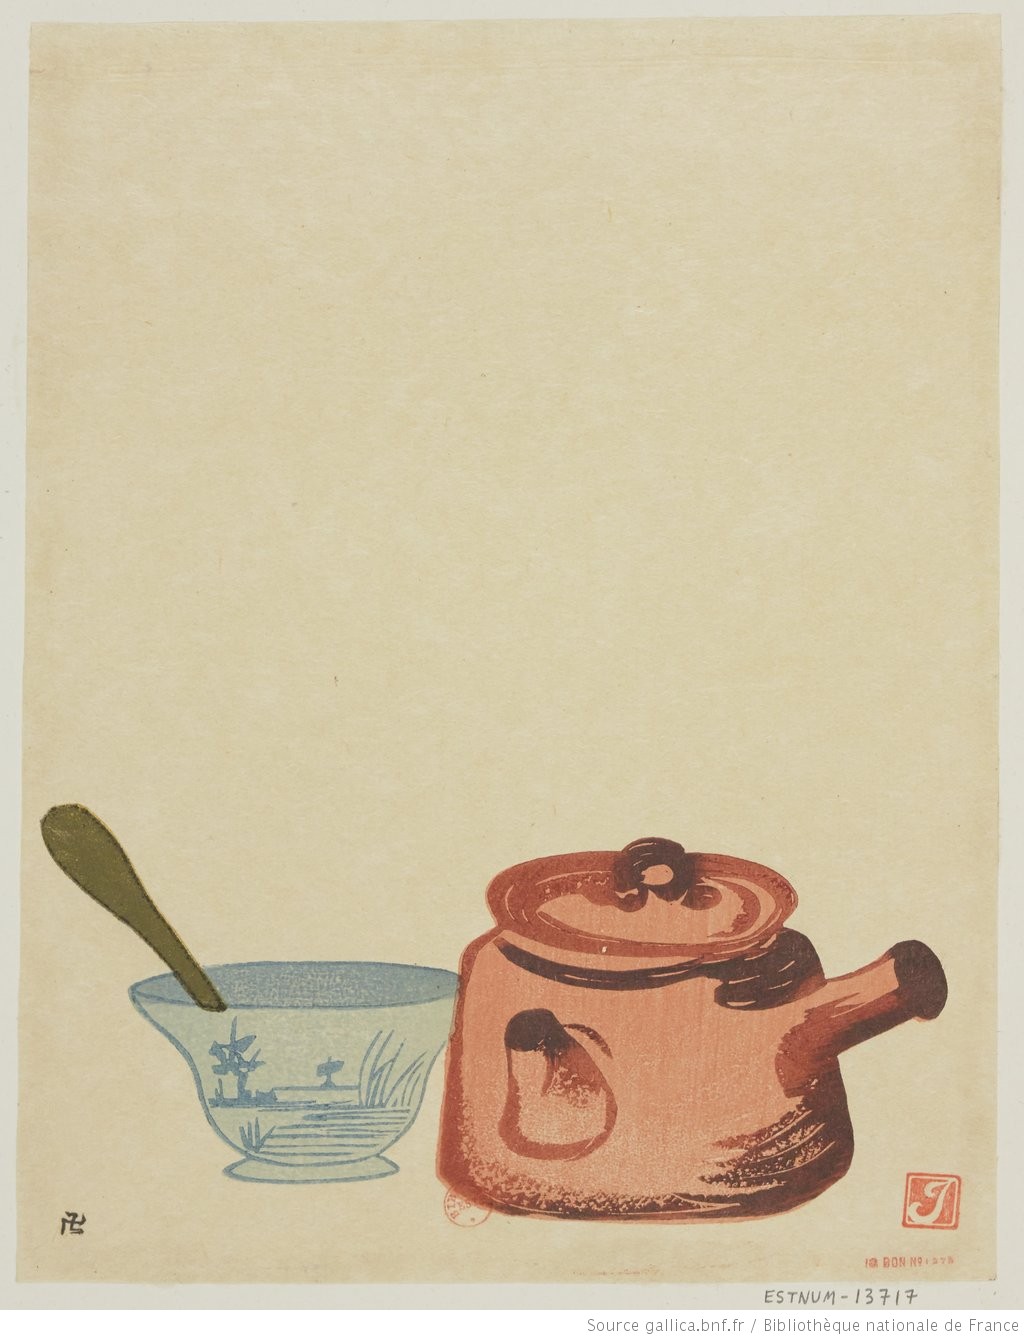 Painting on paper of a Japanese teapot and cup